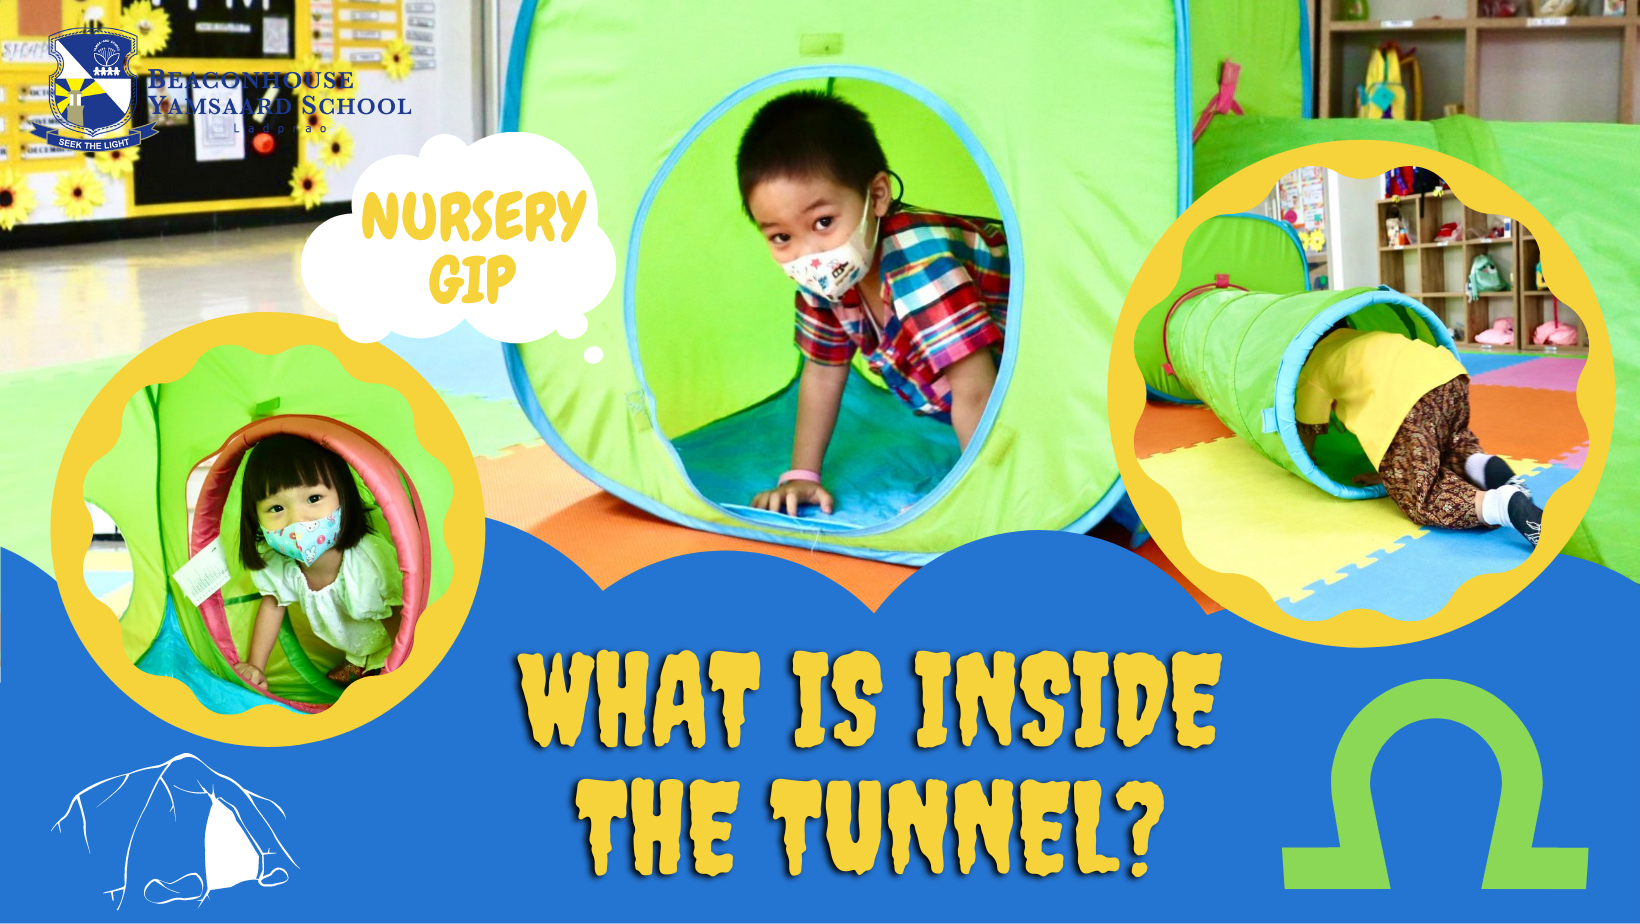 NURSERY-GIP-What-is-inside-the-tunnel.png